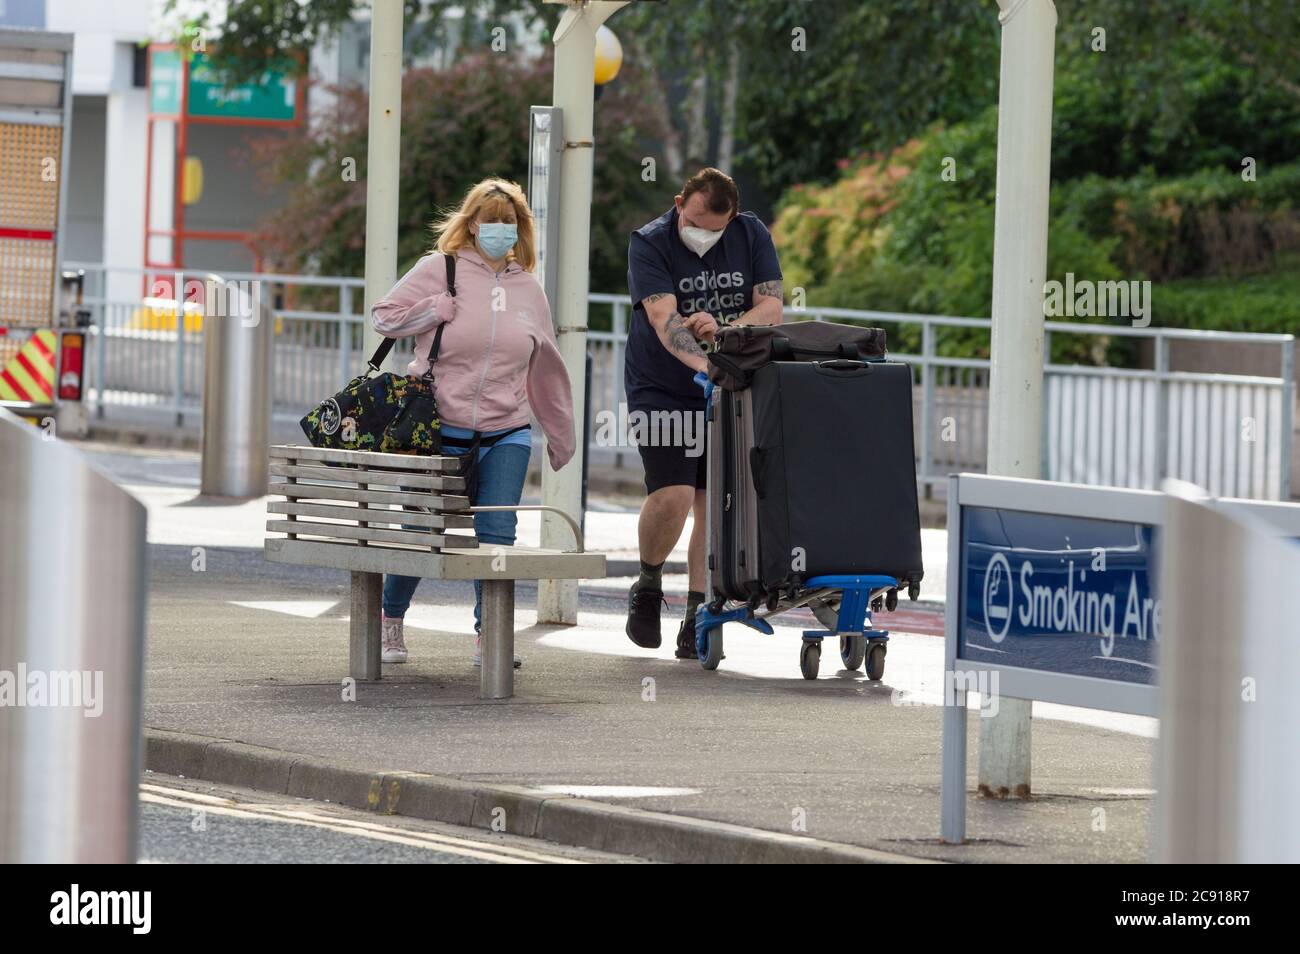 Glasgow, Scotland, UK. 28th July, 2020. Pictured: Passengers using Glasgow Airport seen carrying their luggage whilst wearing face masks. Today, Jet2 Holidays cancels all flights to Tenerife, Fuerteventura, Gran Canaria, Lanzarote, Majorca, Menorca and Ibiza after Foreign Office advised against non-essential travel to the islands. Jet2 planes now stand on the tarmac at Glasgow. Jet2 have advised passengers due to travel not to go to Scottish airports as their flights have been cancelled. Credit: Colin Fisher/Alamy Live News Stock Photo